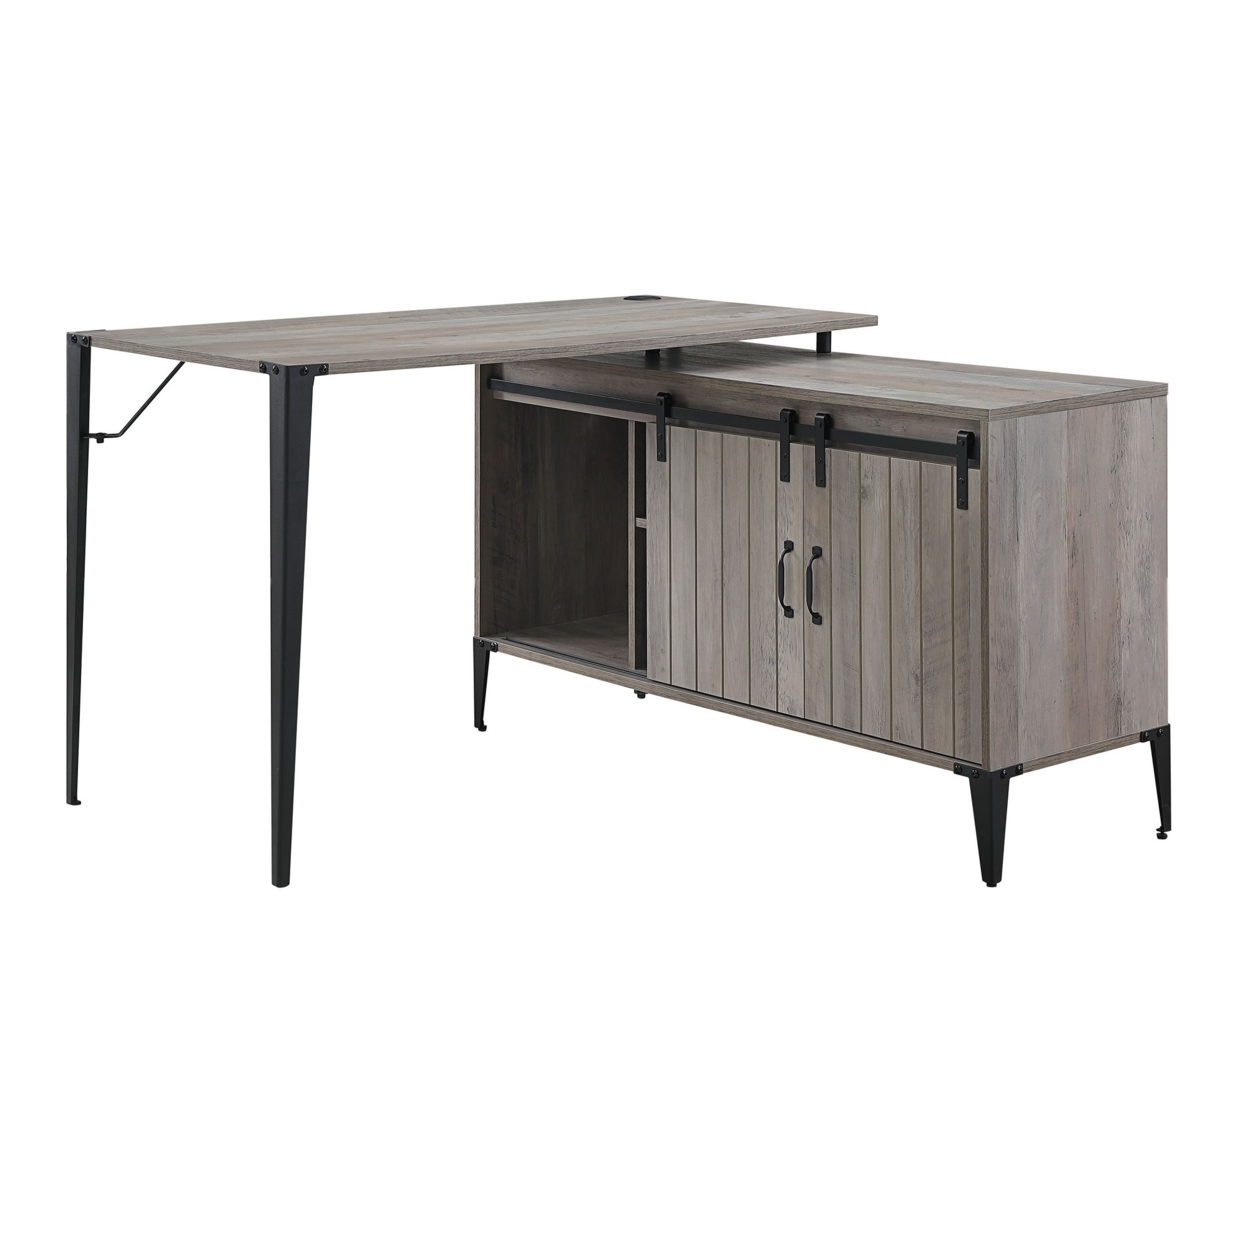 Writing Desk With With Metal Leg And Cord Management- Saltoro Sherpi